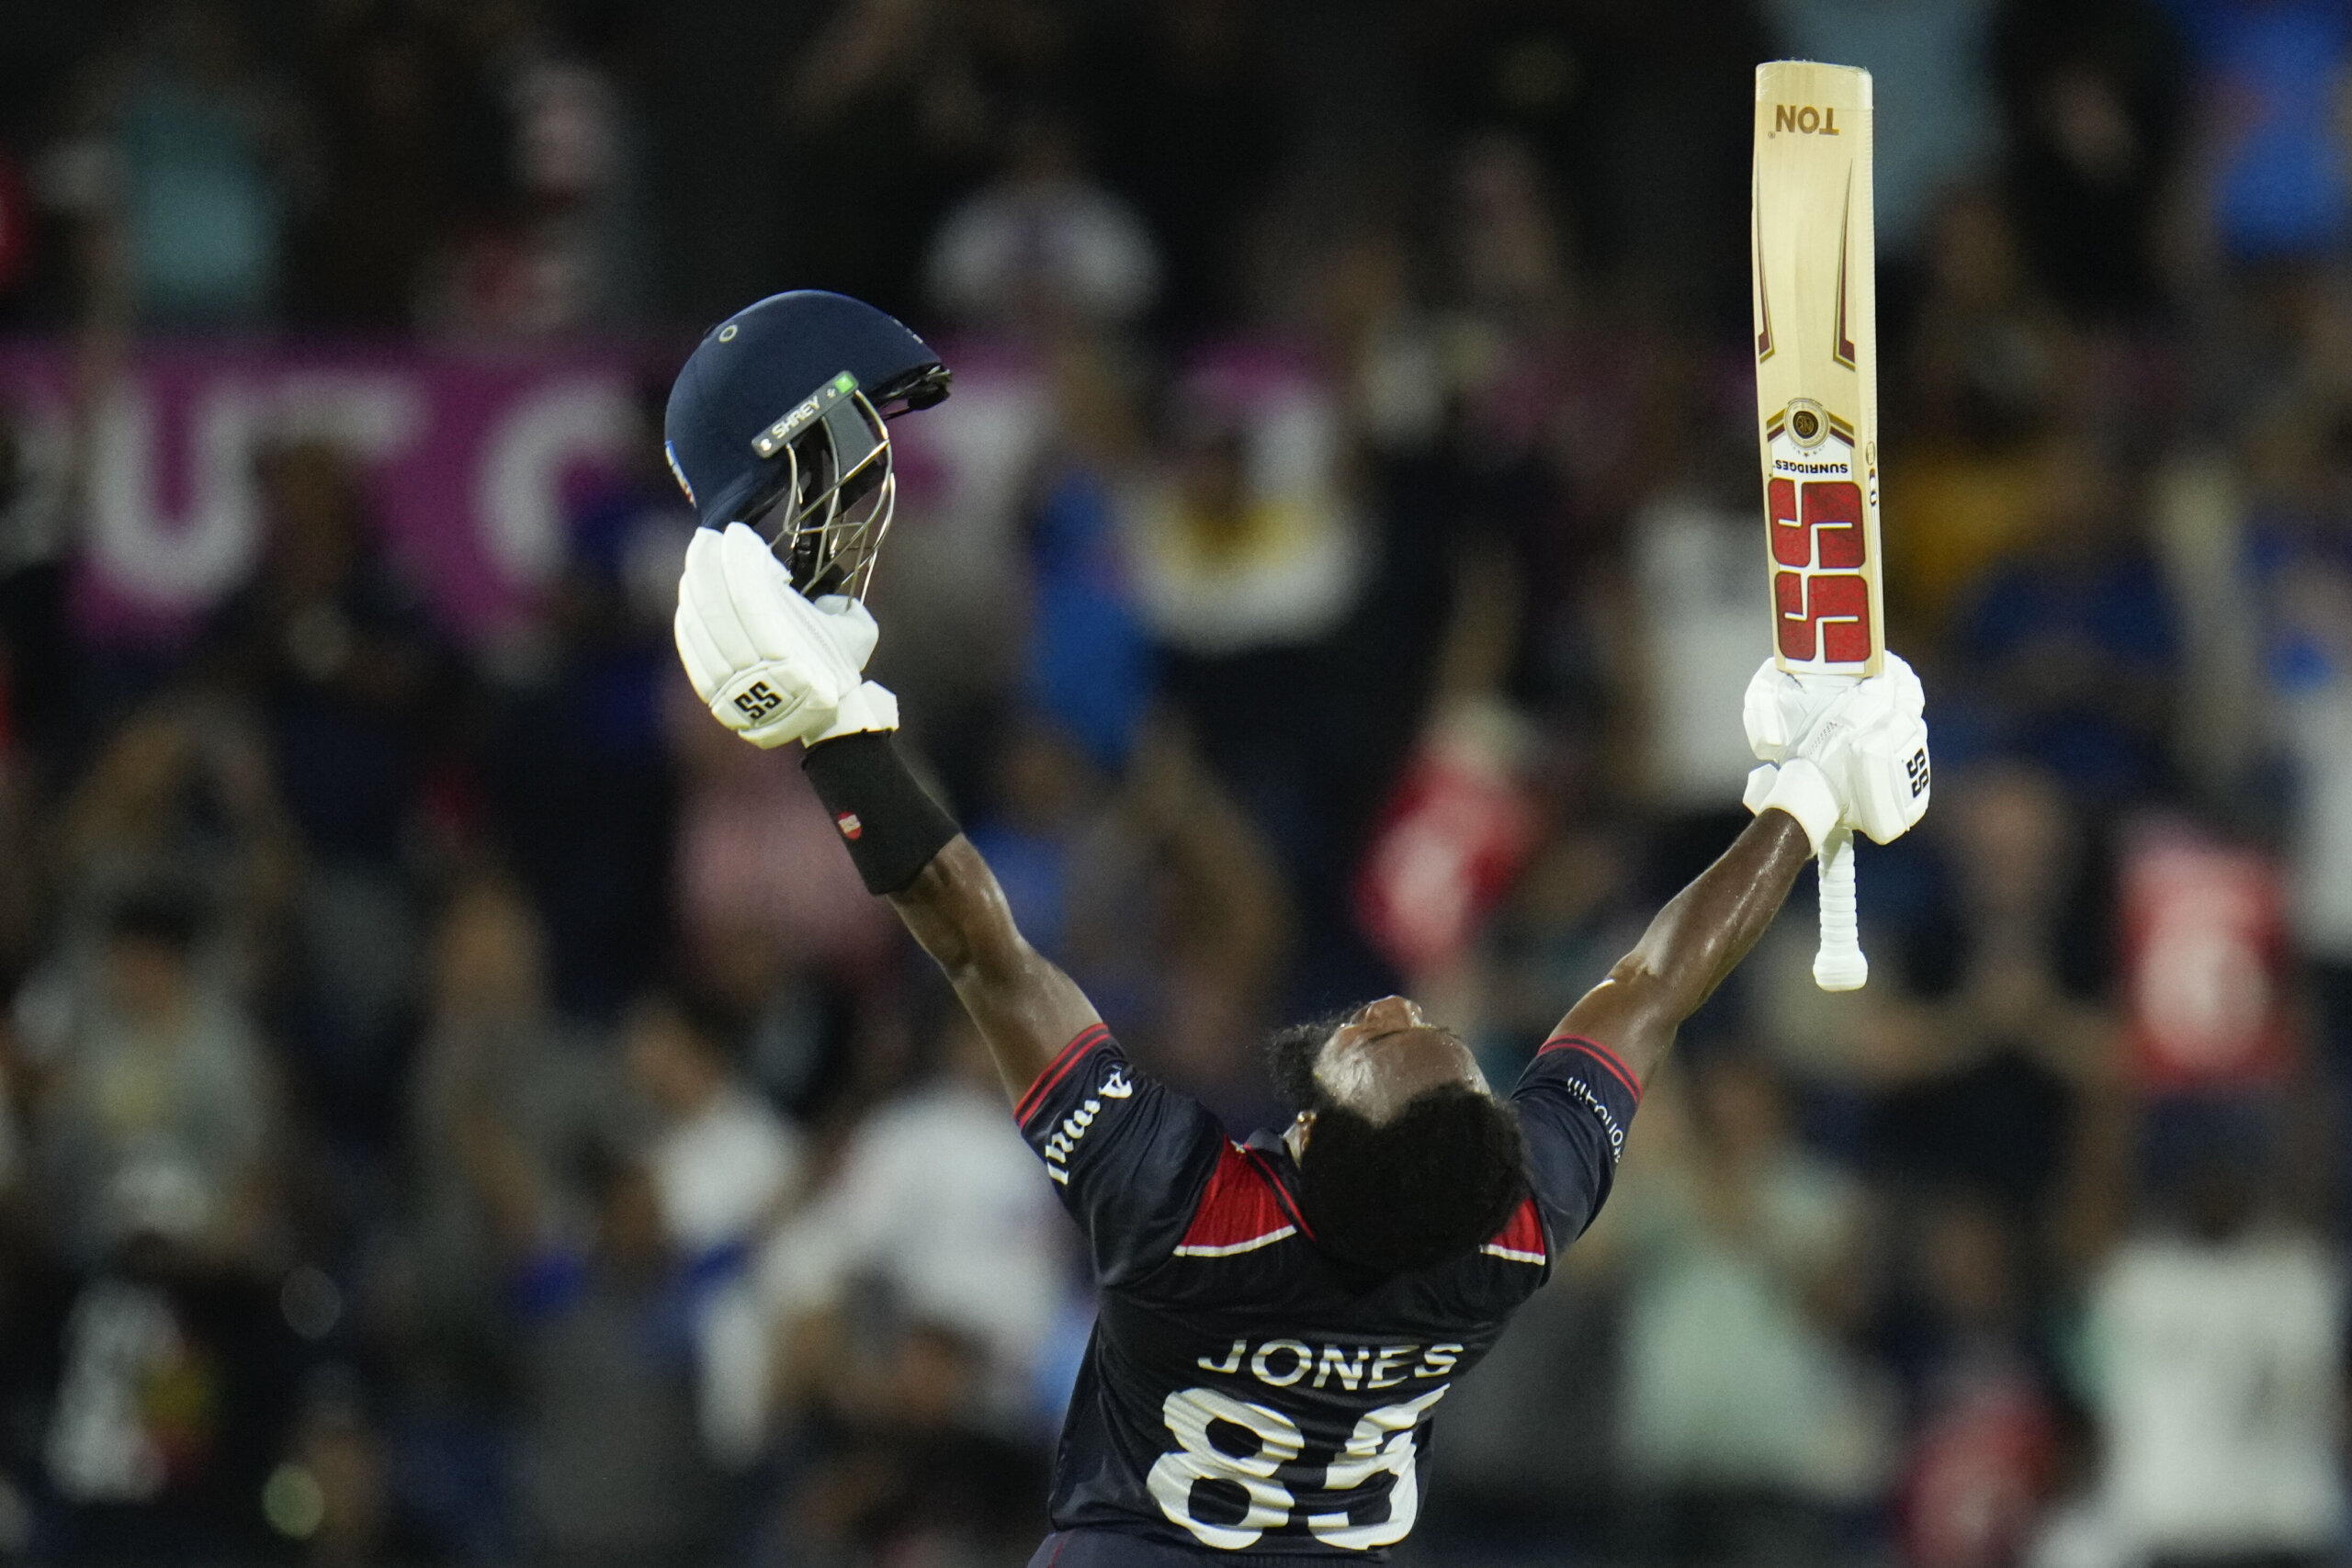 United States shocks cricket heavyweight Pakistan at T20 World Cup in a Super Over tiebreaker – WTOP News